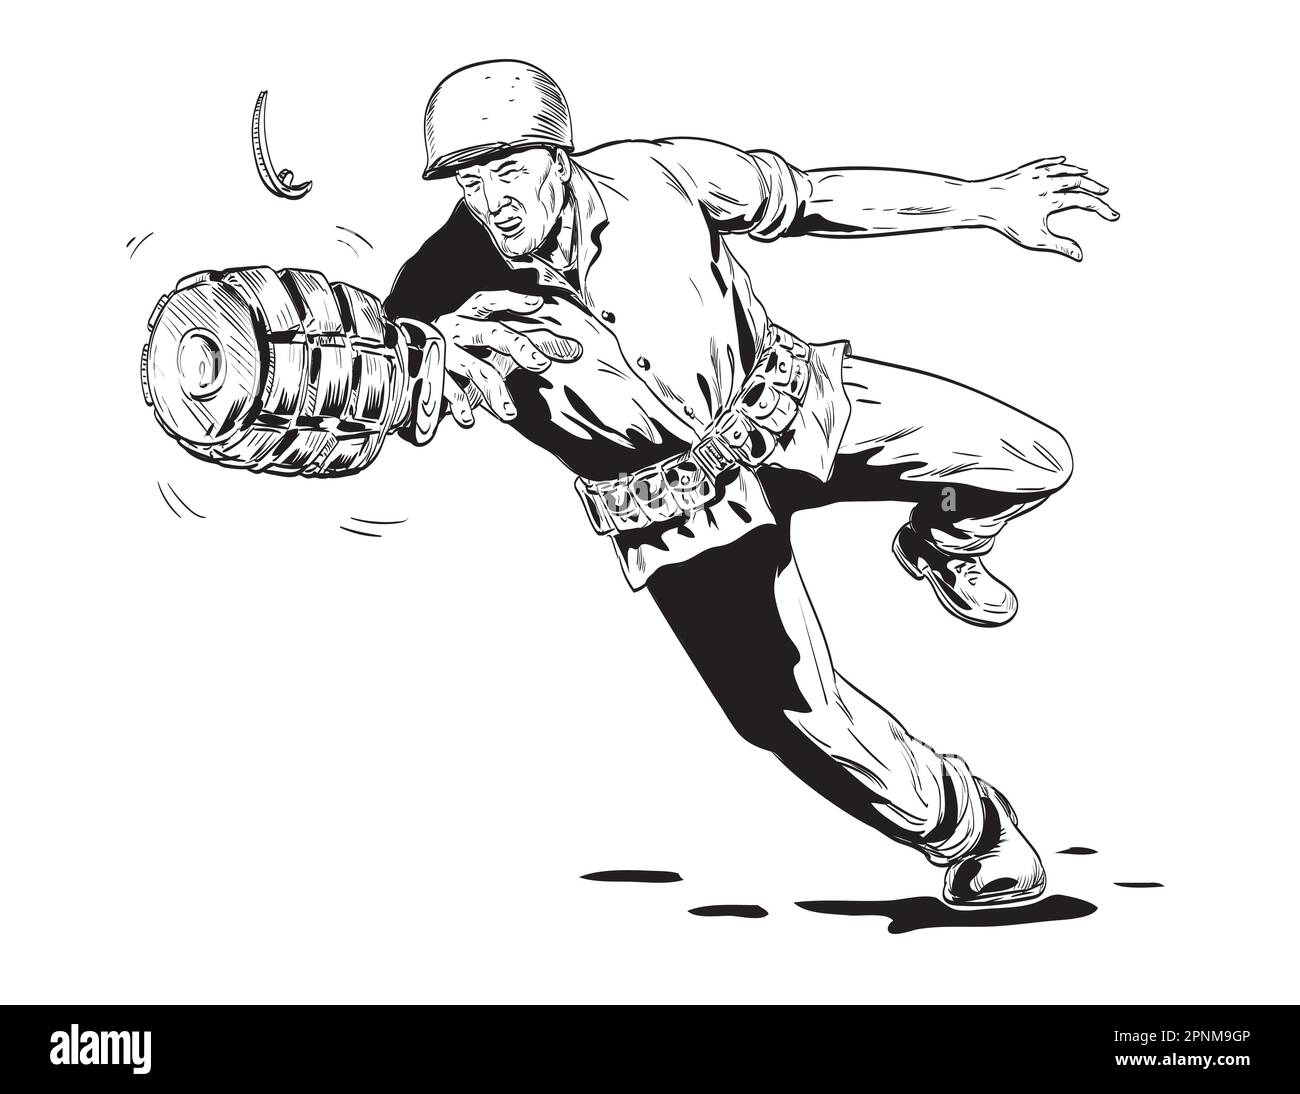 Comics style drawing or illustration of a World War Two American GI soldier throwing hand grenade viewed from front on isolated background done in bla Stock Photo